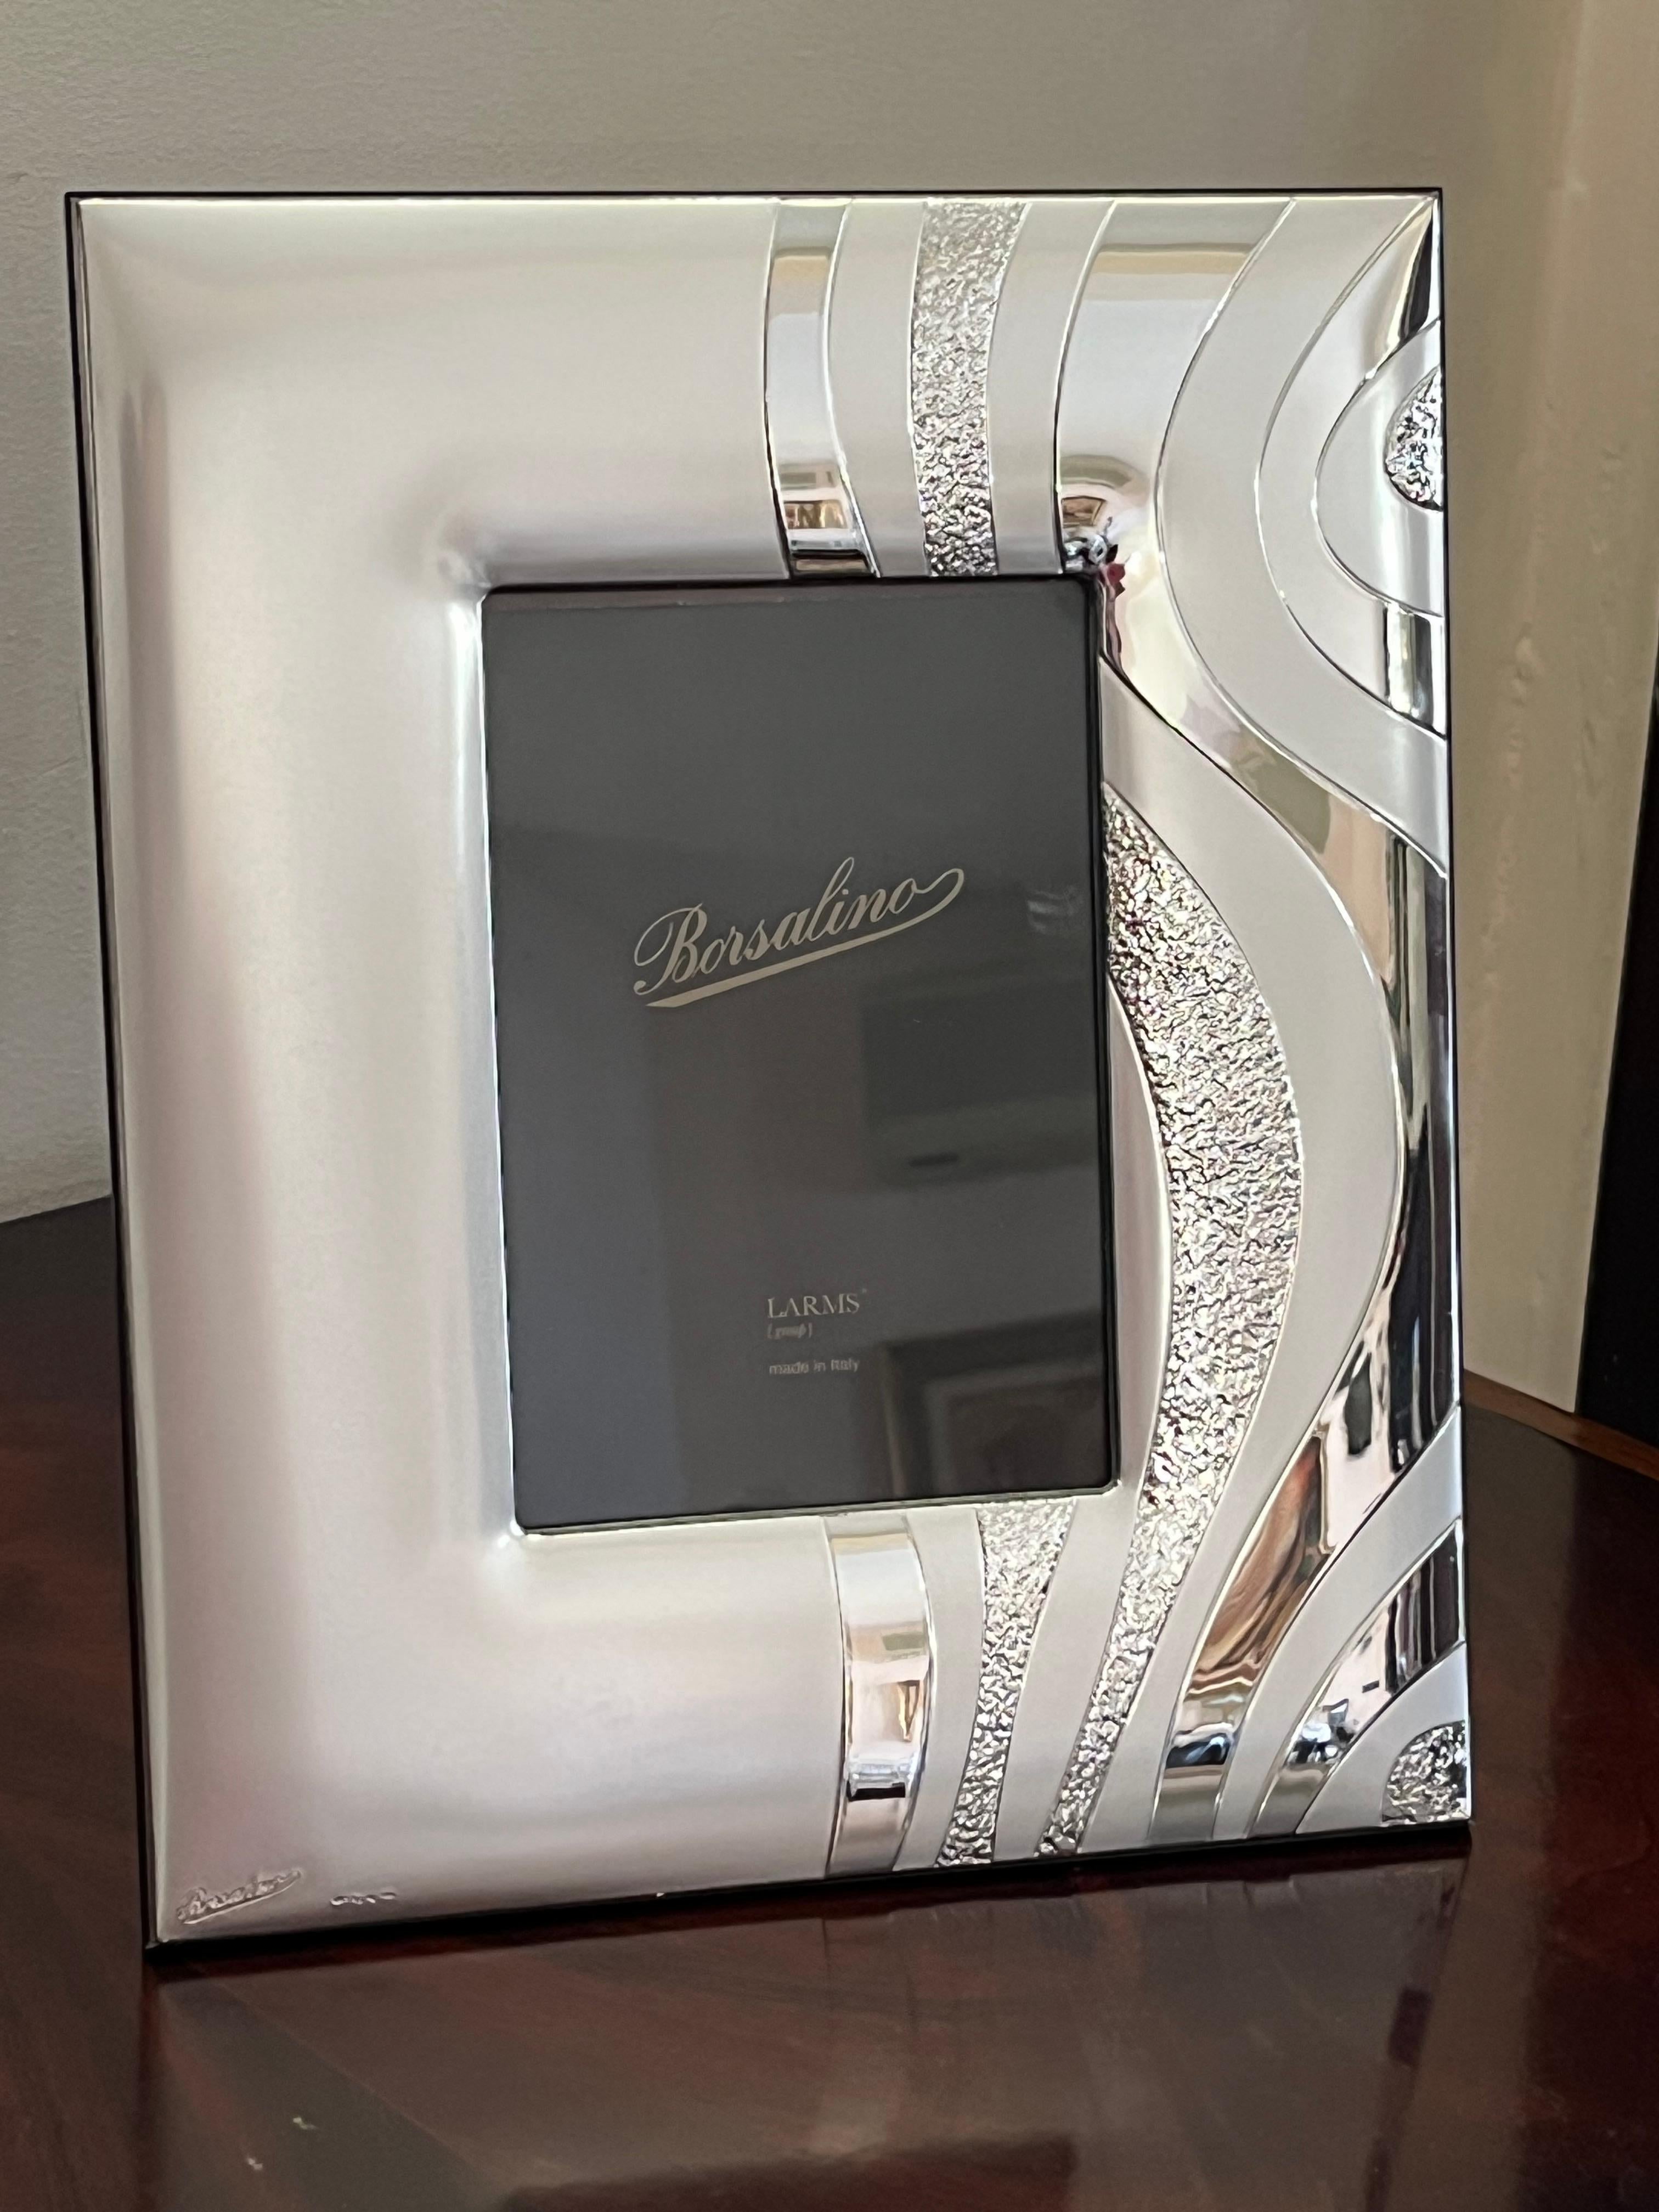 Borsalino silver photo frame, Italy, 1980s
It belonged to my grandparents and is in excellent condition. Small signs of the time. External measures 28 cm high by 23 cm wide. It can house a photograph measuring 15 cm by 10 cm.